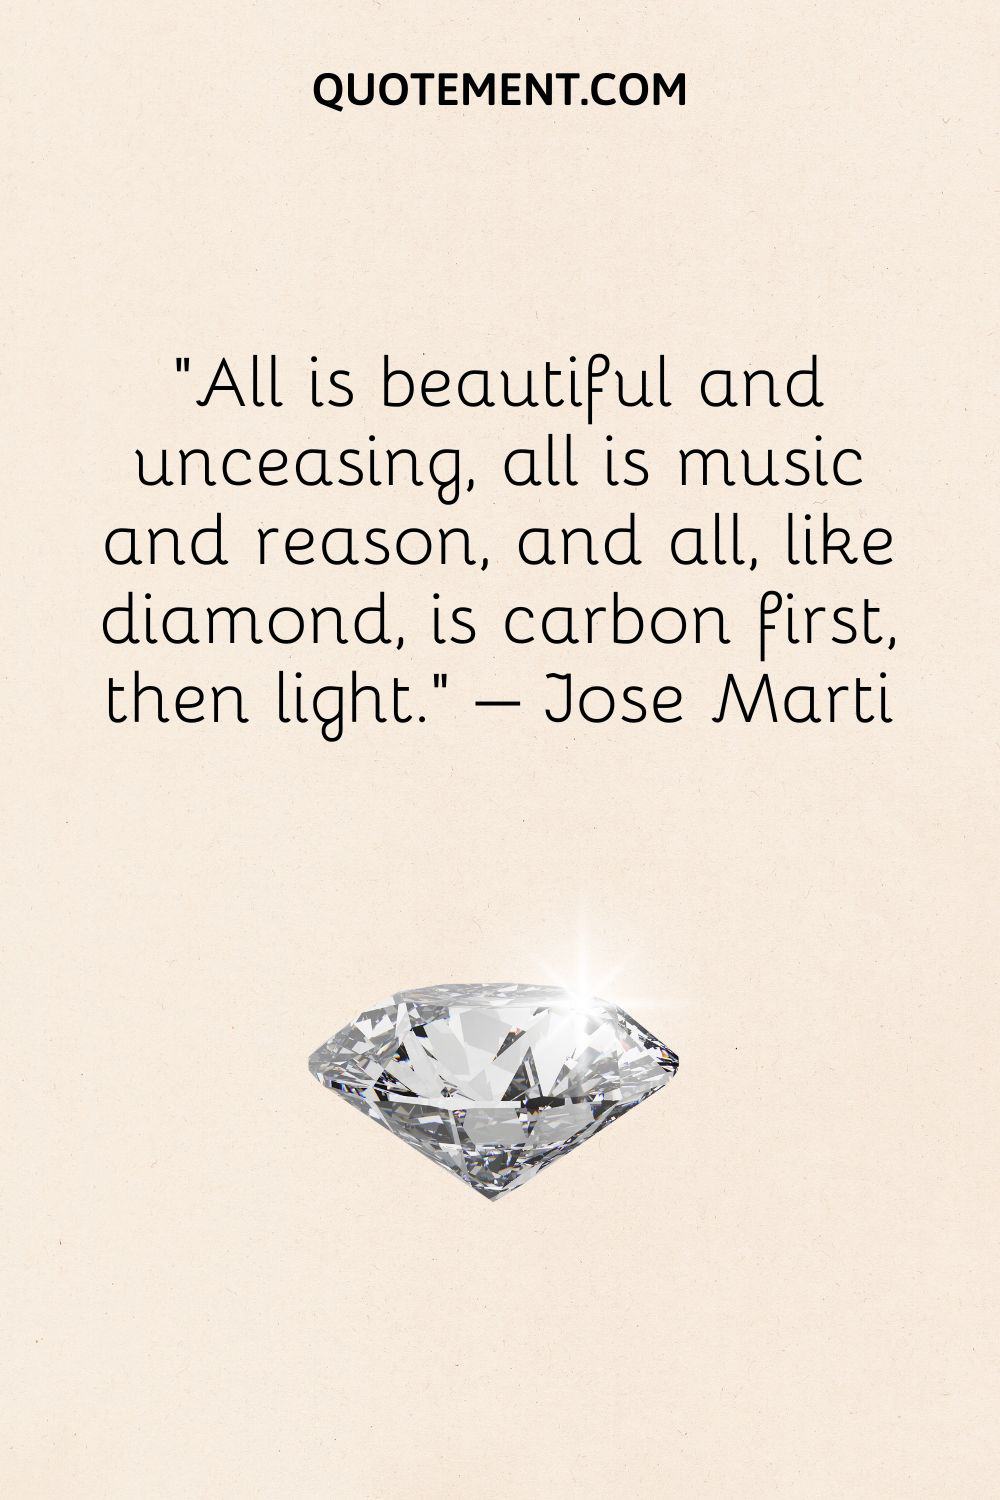 All is beautiful and unceasing, all is music and reason, and all, like diamond, is carbon first, then light